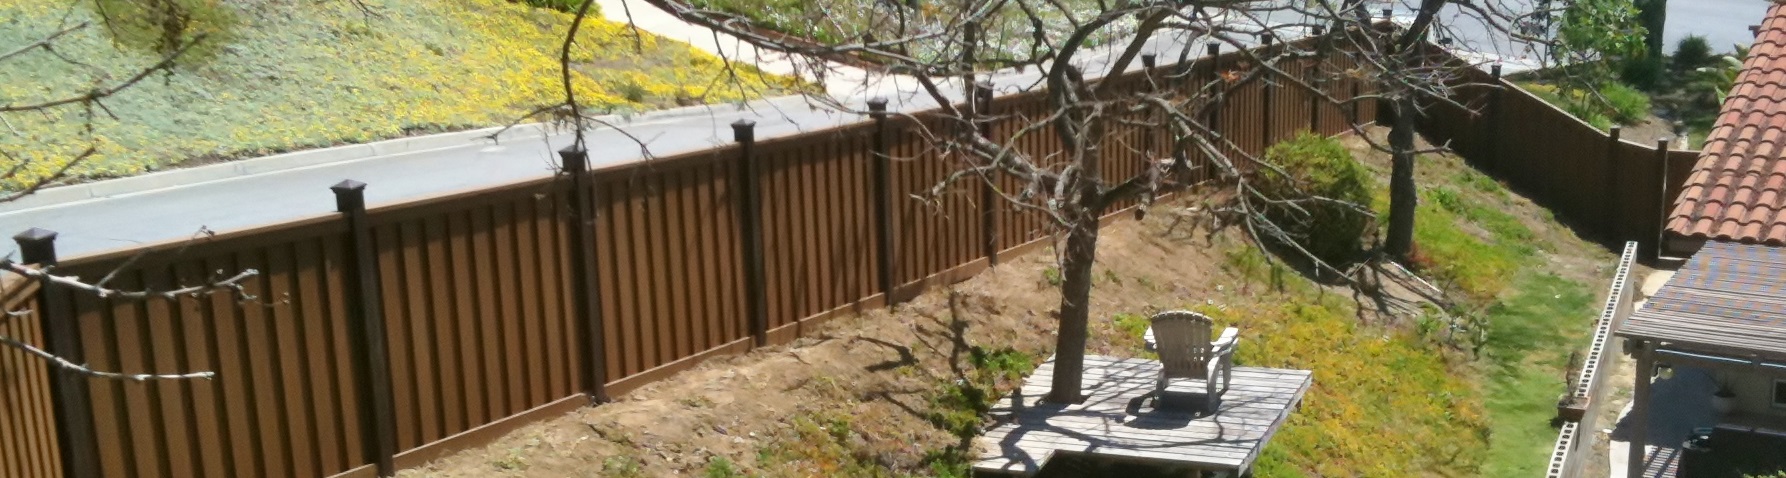 Trex Fencing constructed in Chino Hills California